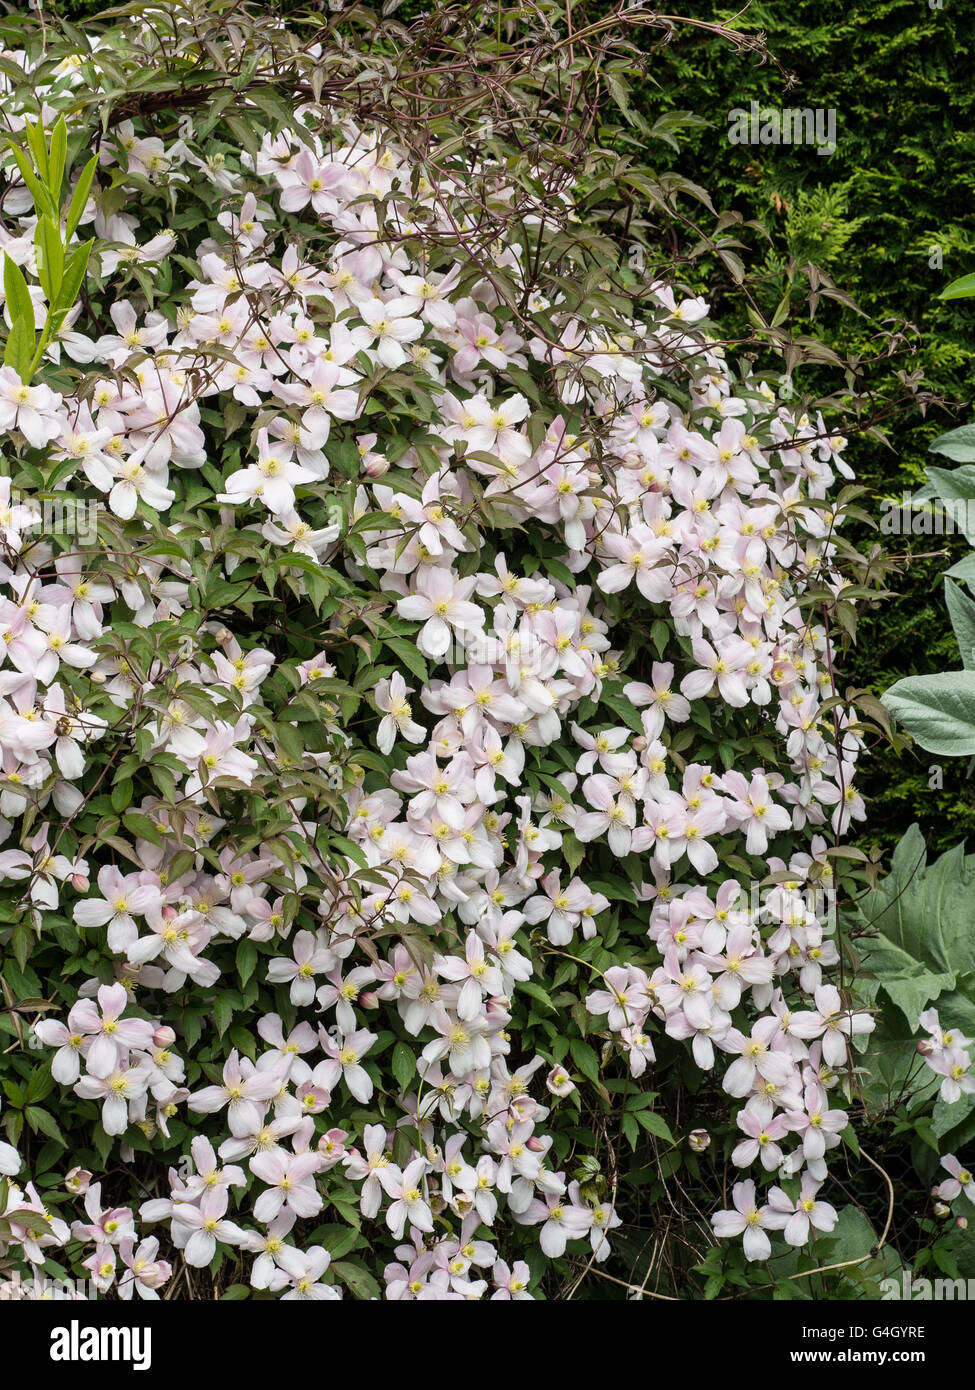 Clematis 'Pink Perfection' flowering over shrubs Stock Photo